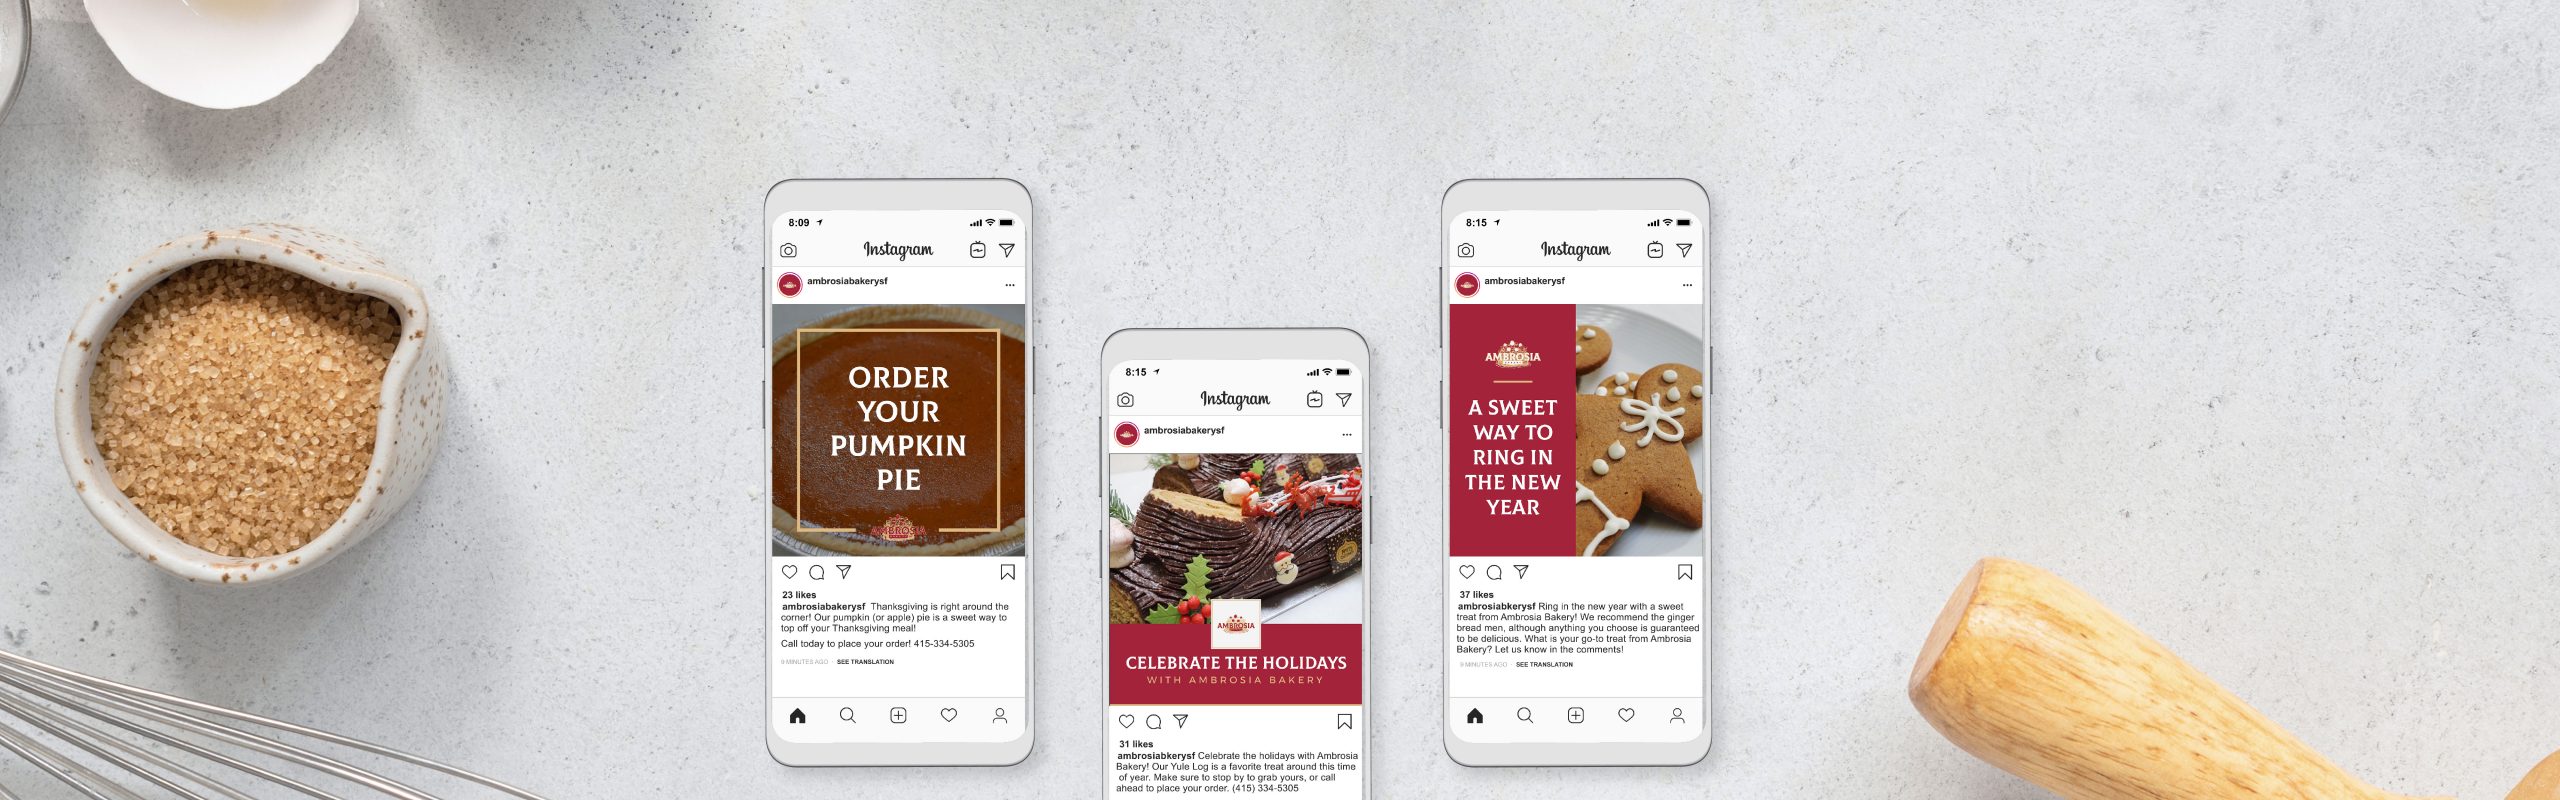 Three smartphones are laid out on a table, each displaying a different Instagram post from Ambrosia Bakery's account promoting various seasonal treats such as pumpkin pie, a festive meat platter, and gingerbread